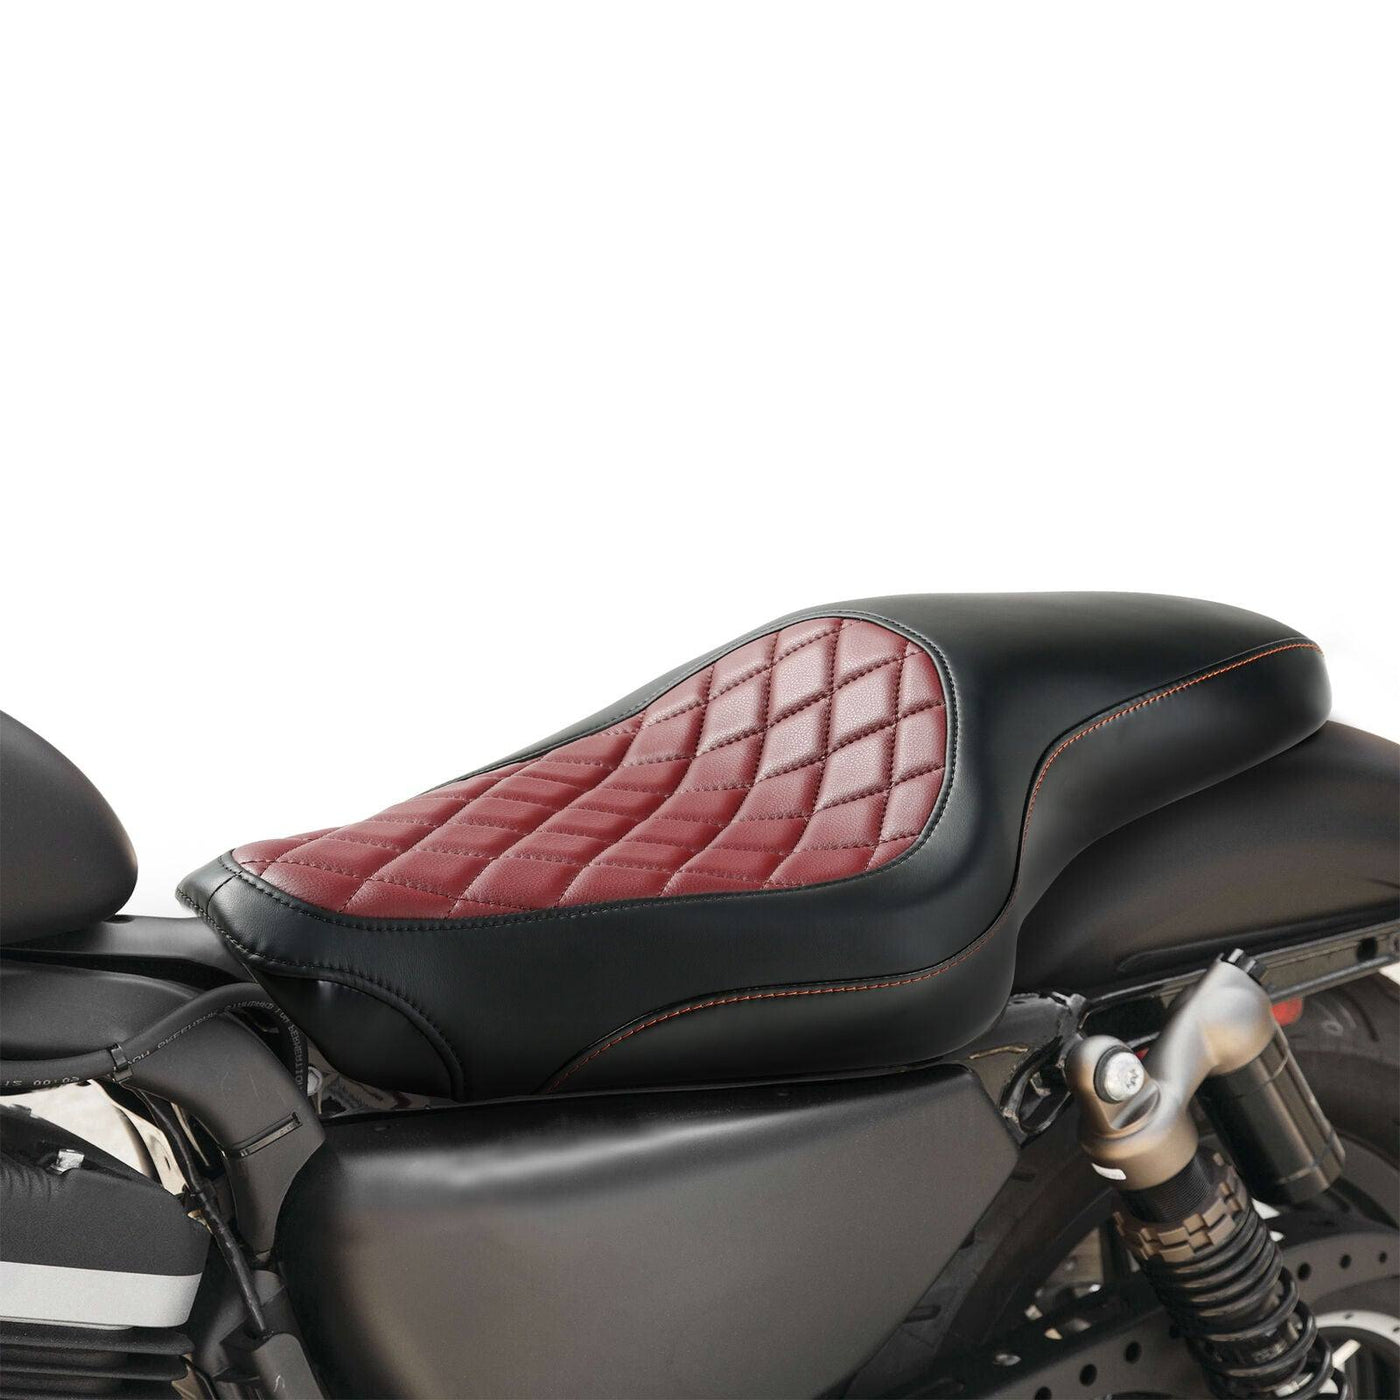 Rider Driver & Passenger Seat Fit For Harley Sportster 883 1200 Custom 2004-2021 - Moto Life Products